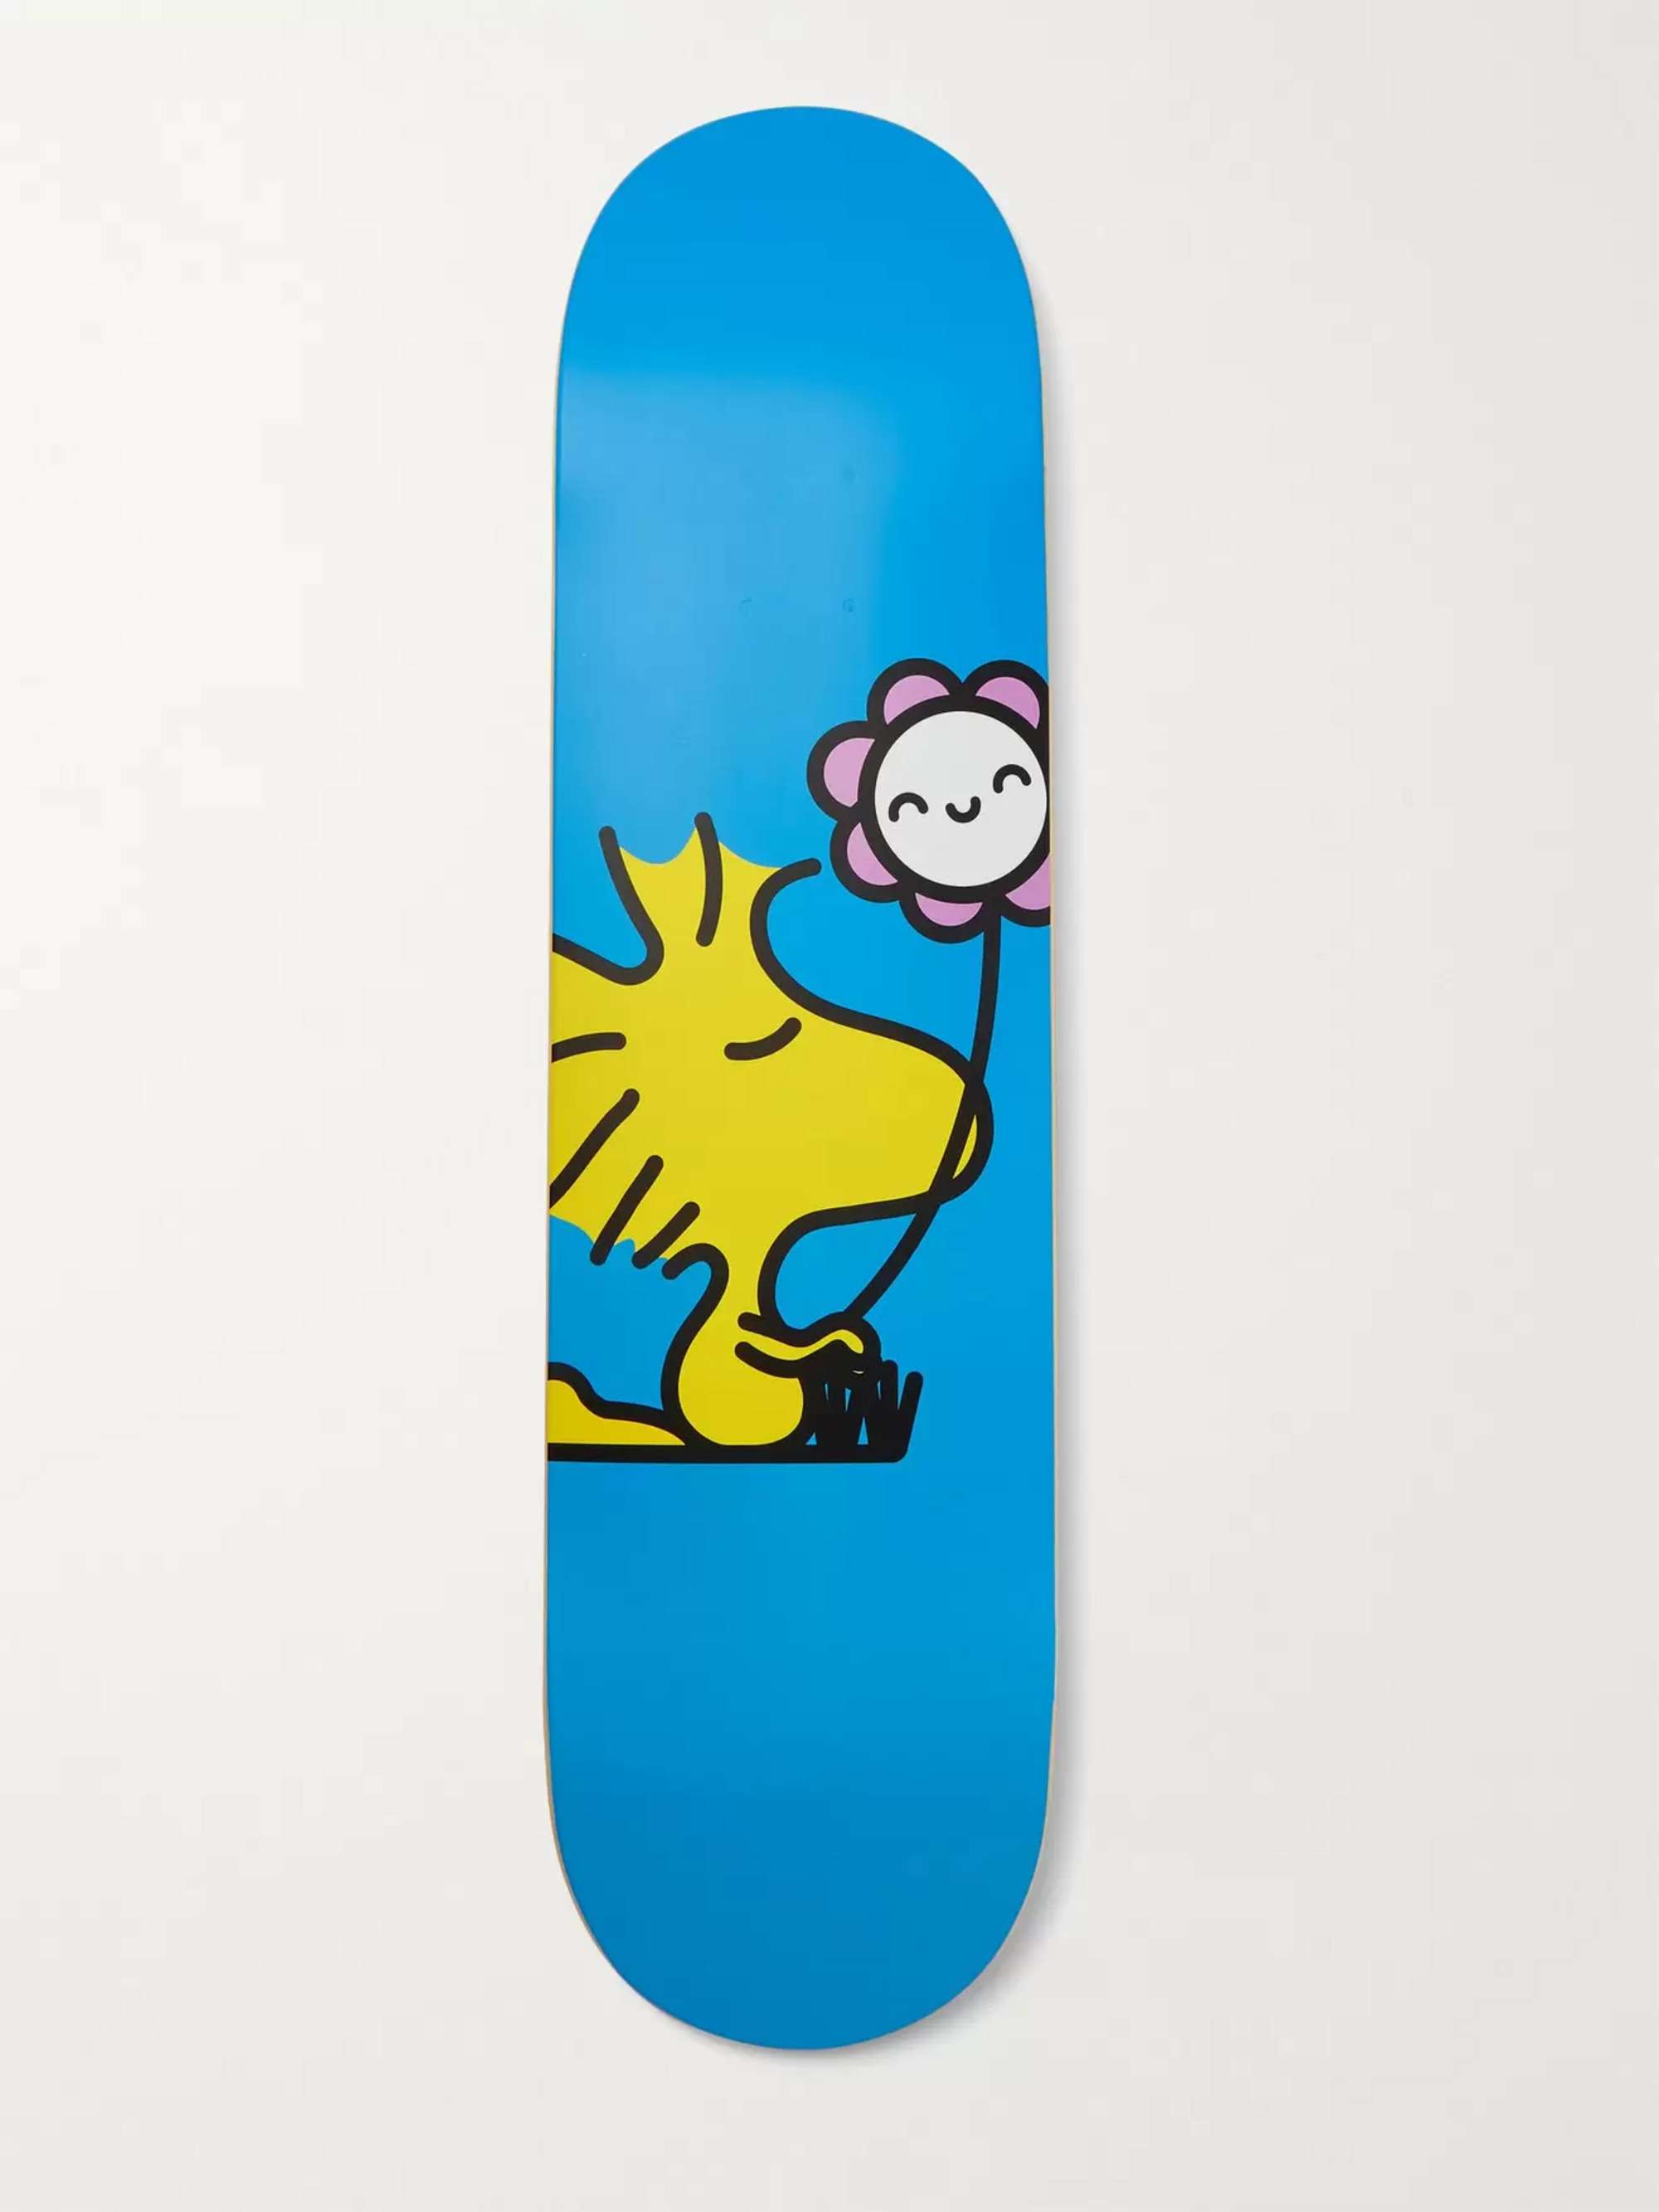 THE SKATEROOM + Peanuts by FriendsWithYou Printed Wooden Skateboard